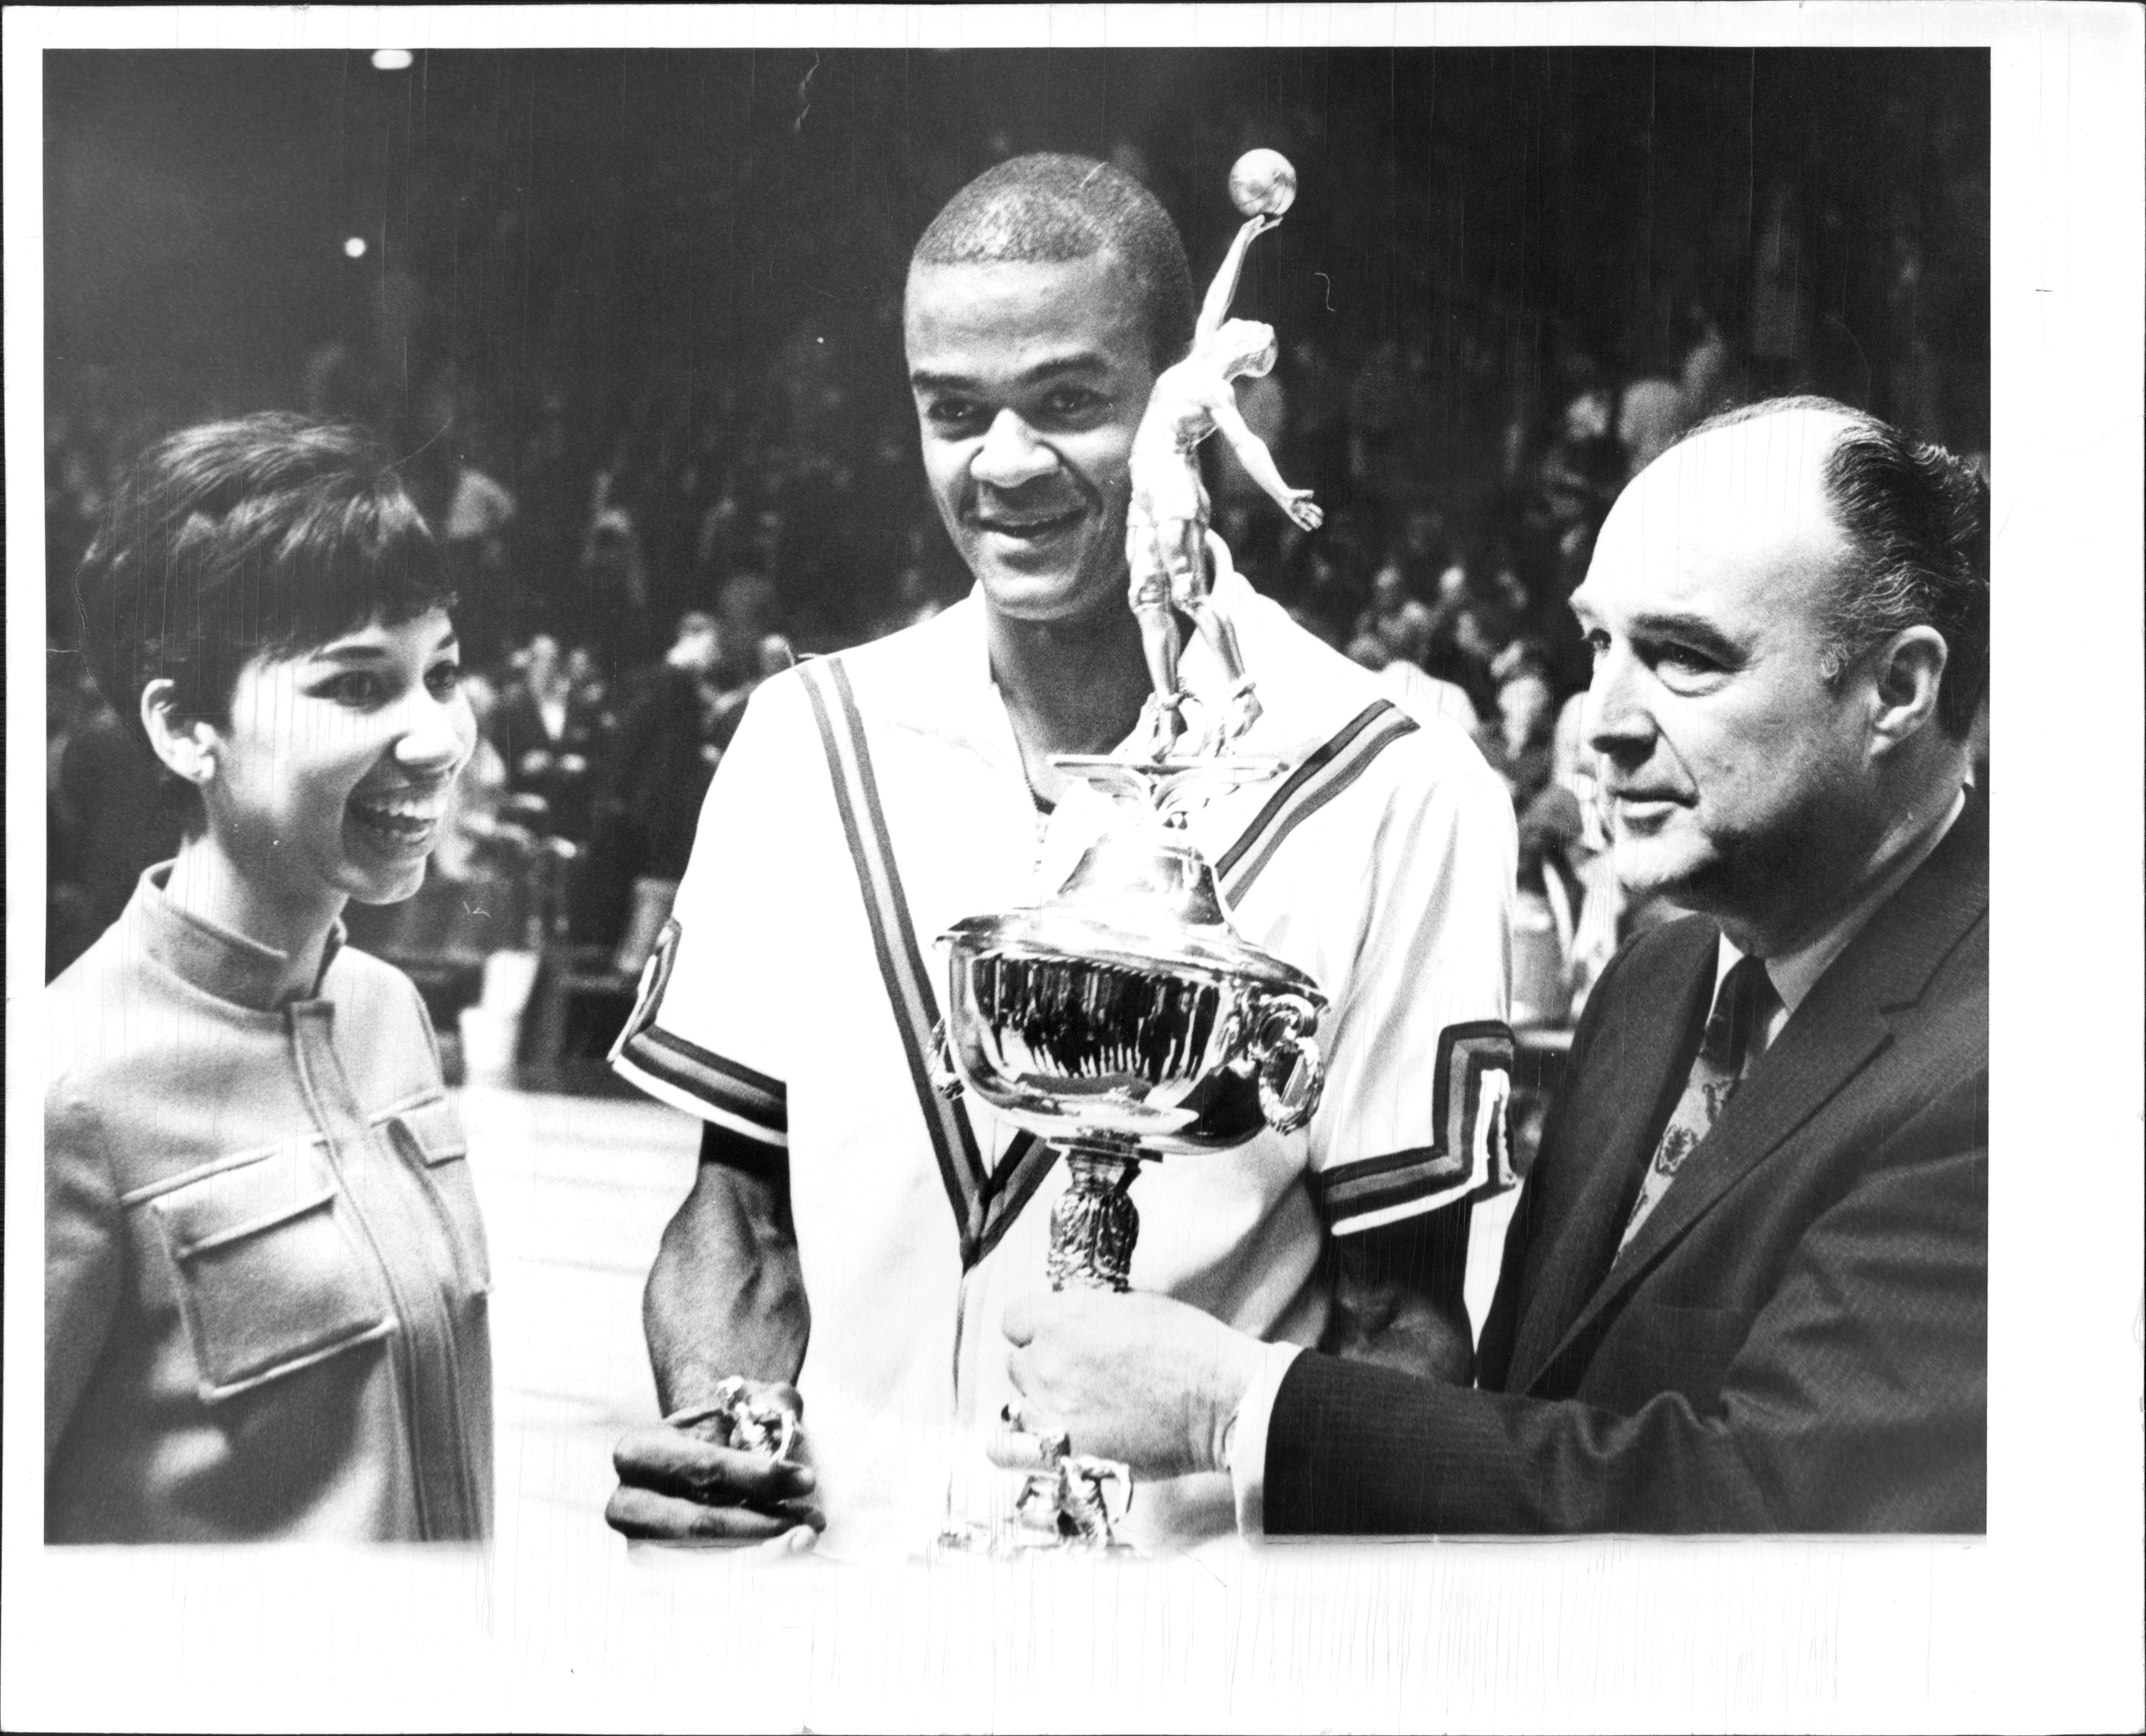 Hal Greer Wins All-Star Game's Most Valuable Player Award